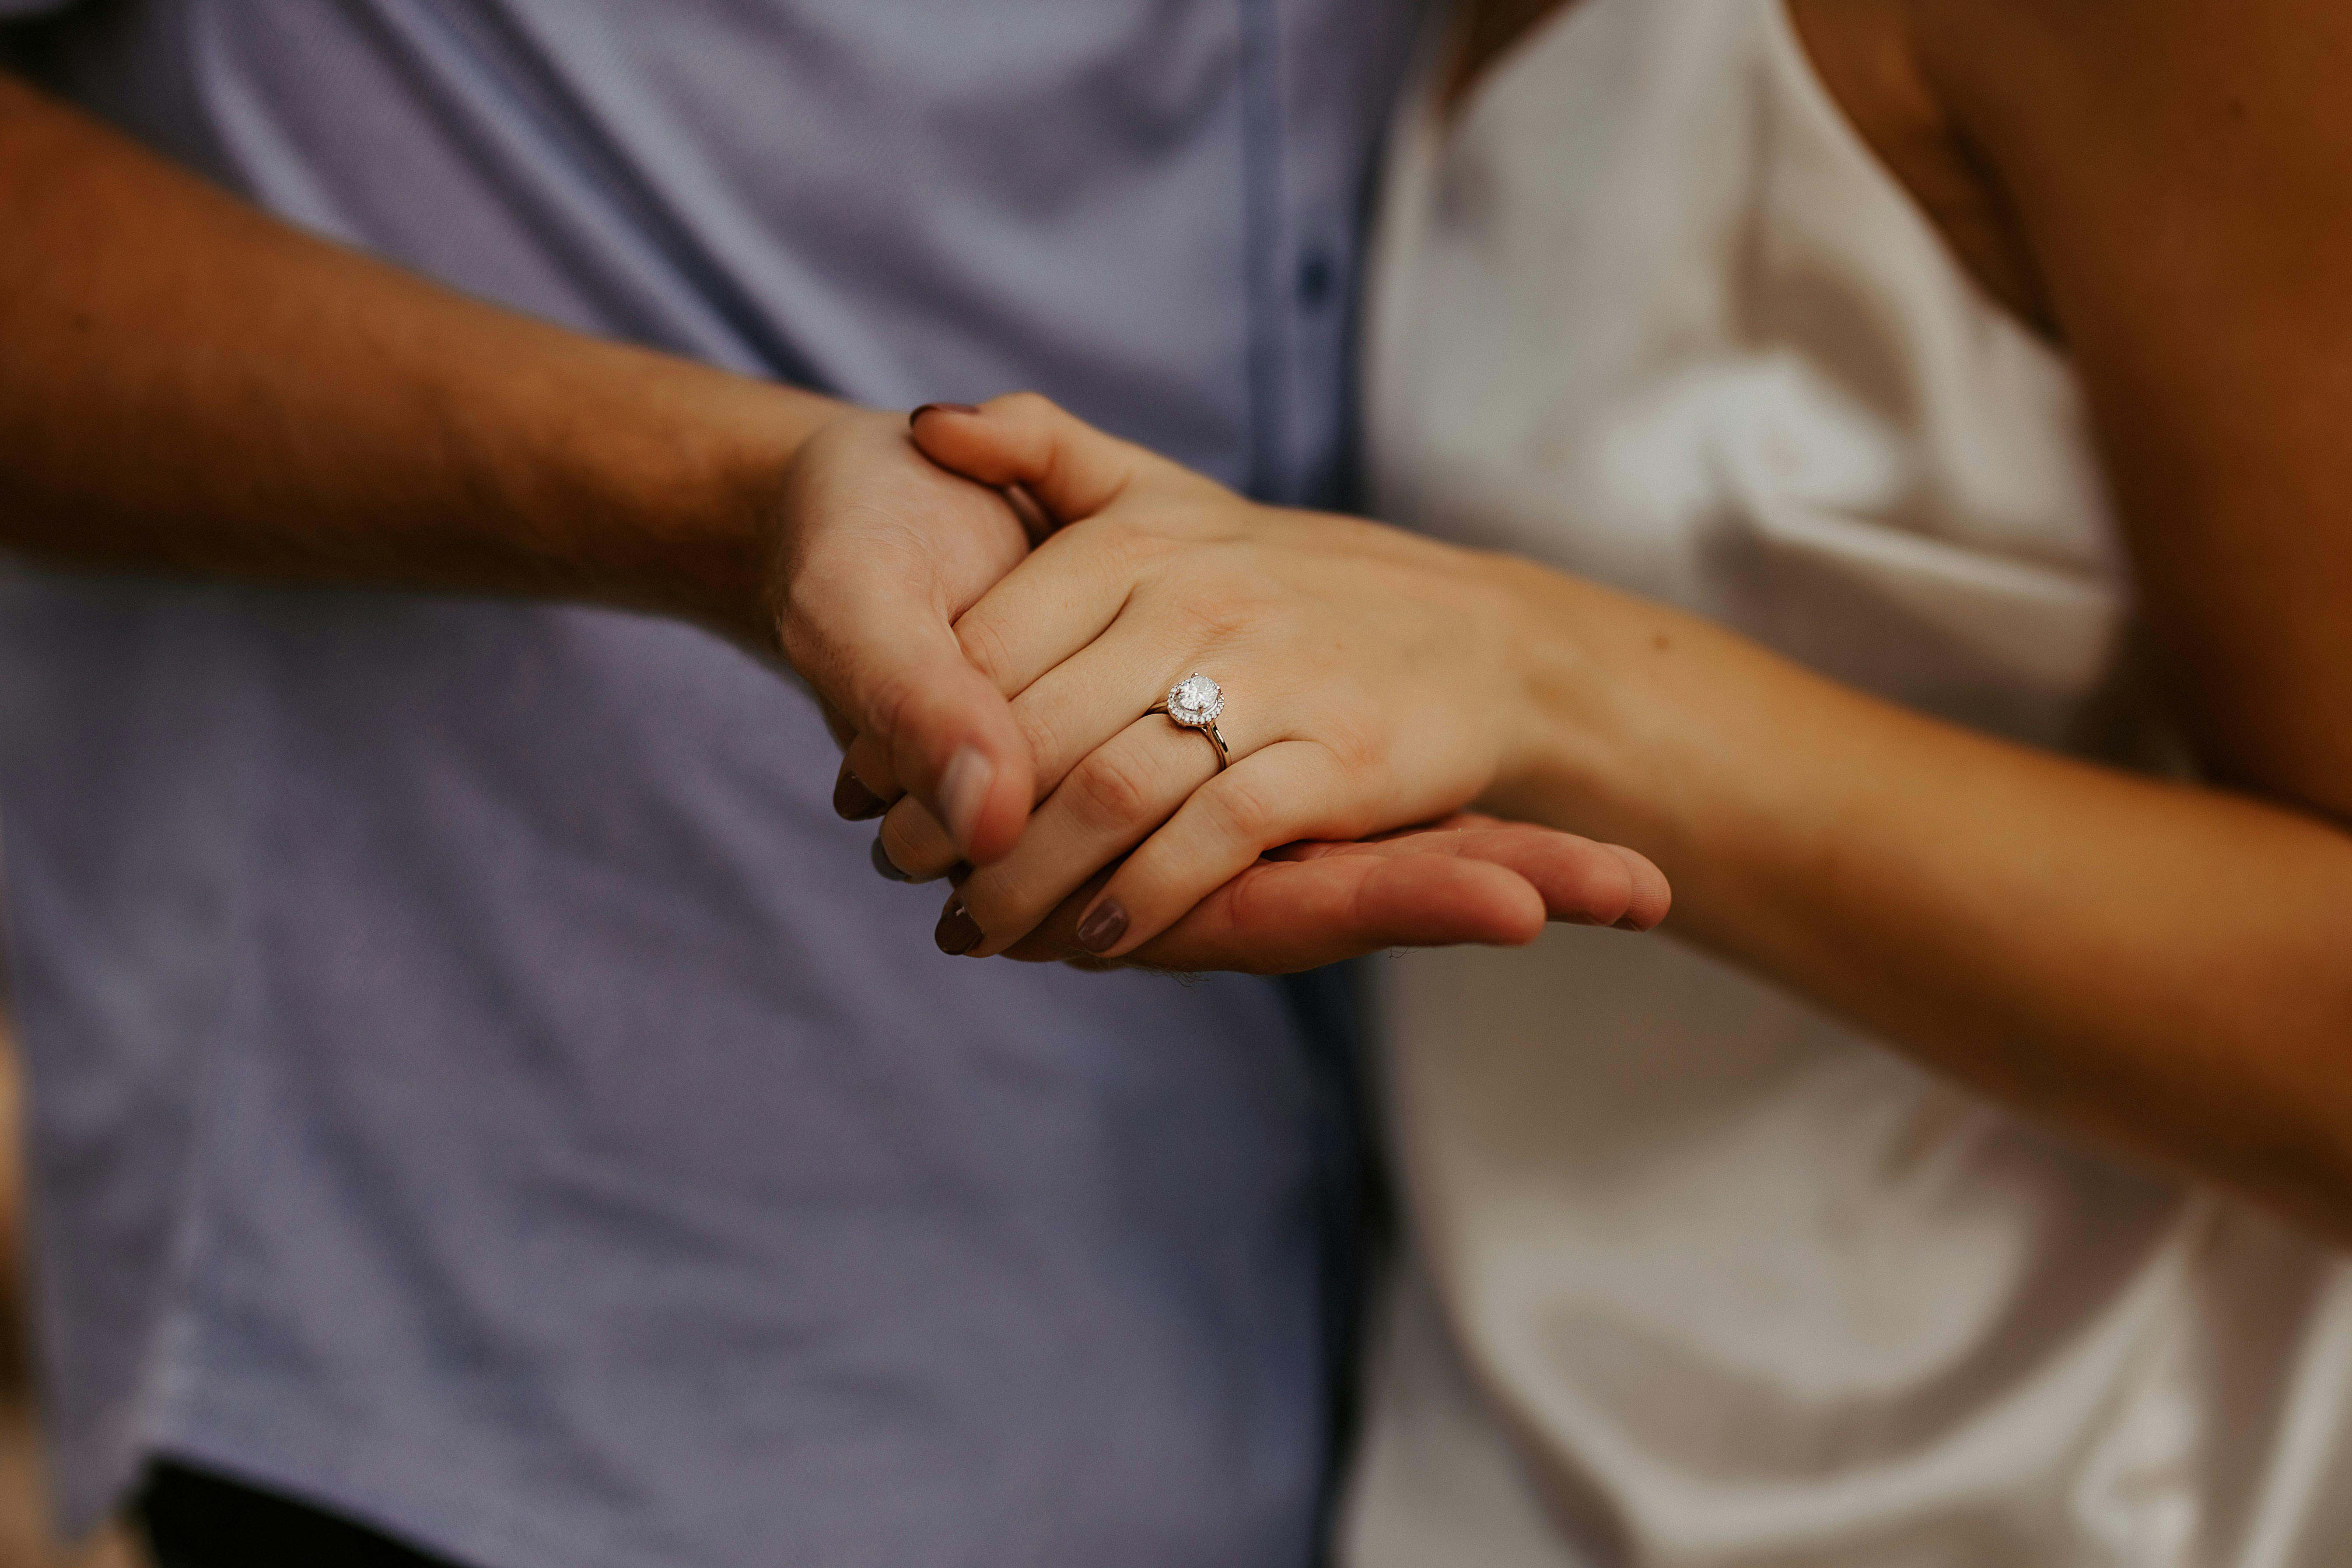 9 Engagement Ring Stories That Will Make You Fall in Love